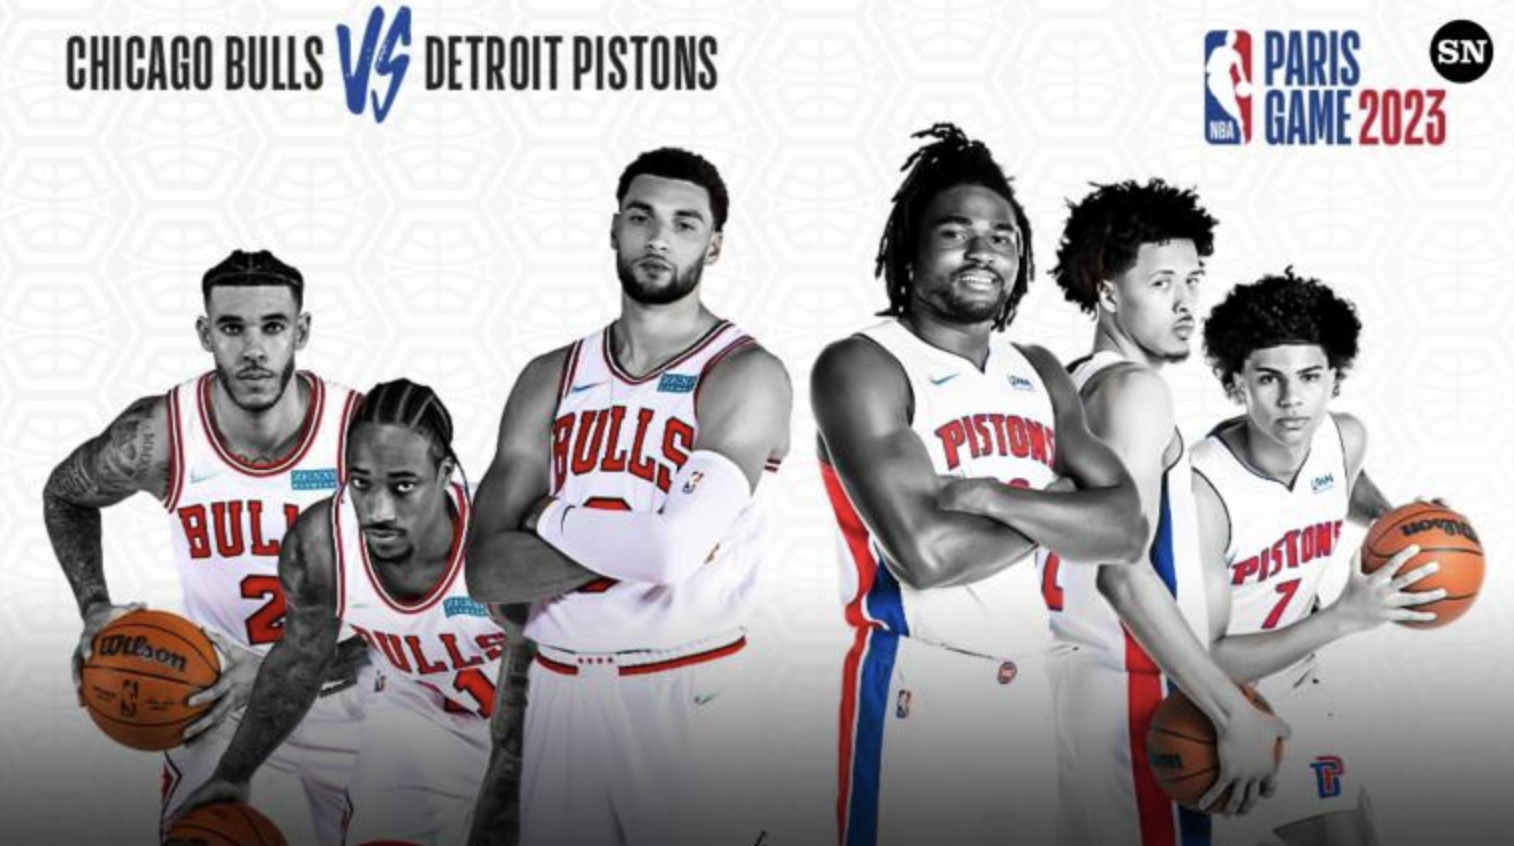 Deezer partners with the NBA for sold out clash between the Detroit Pistons  and the Chicago Bulls as part of 'The NBA Paris Game 2023 presented by  Nike' - Deezer Newsroom